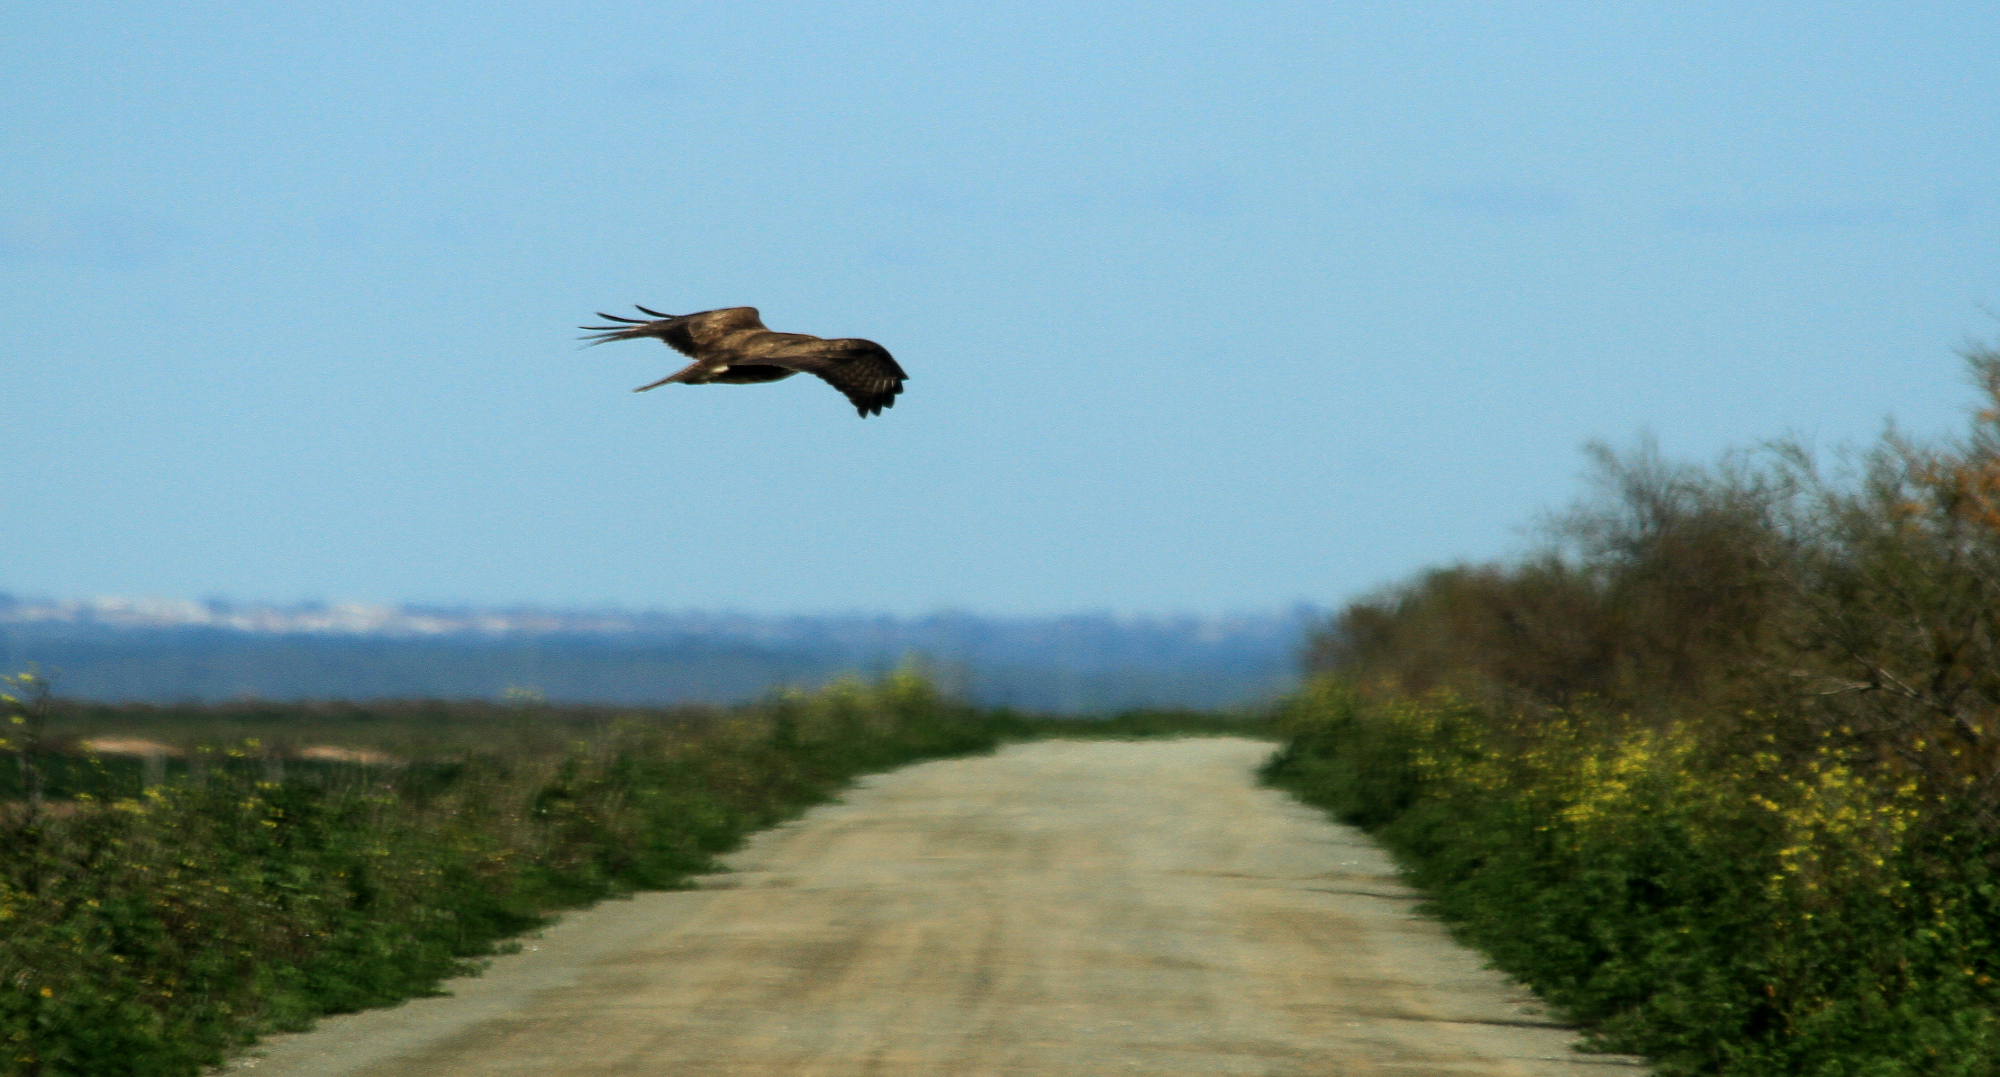 Buzzard on the road